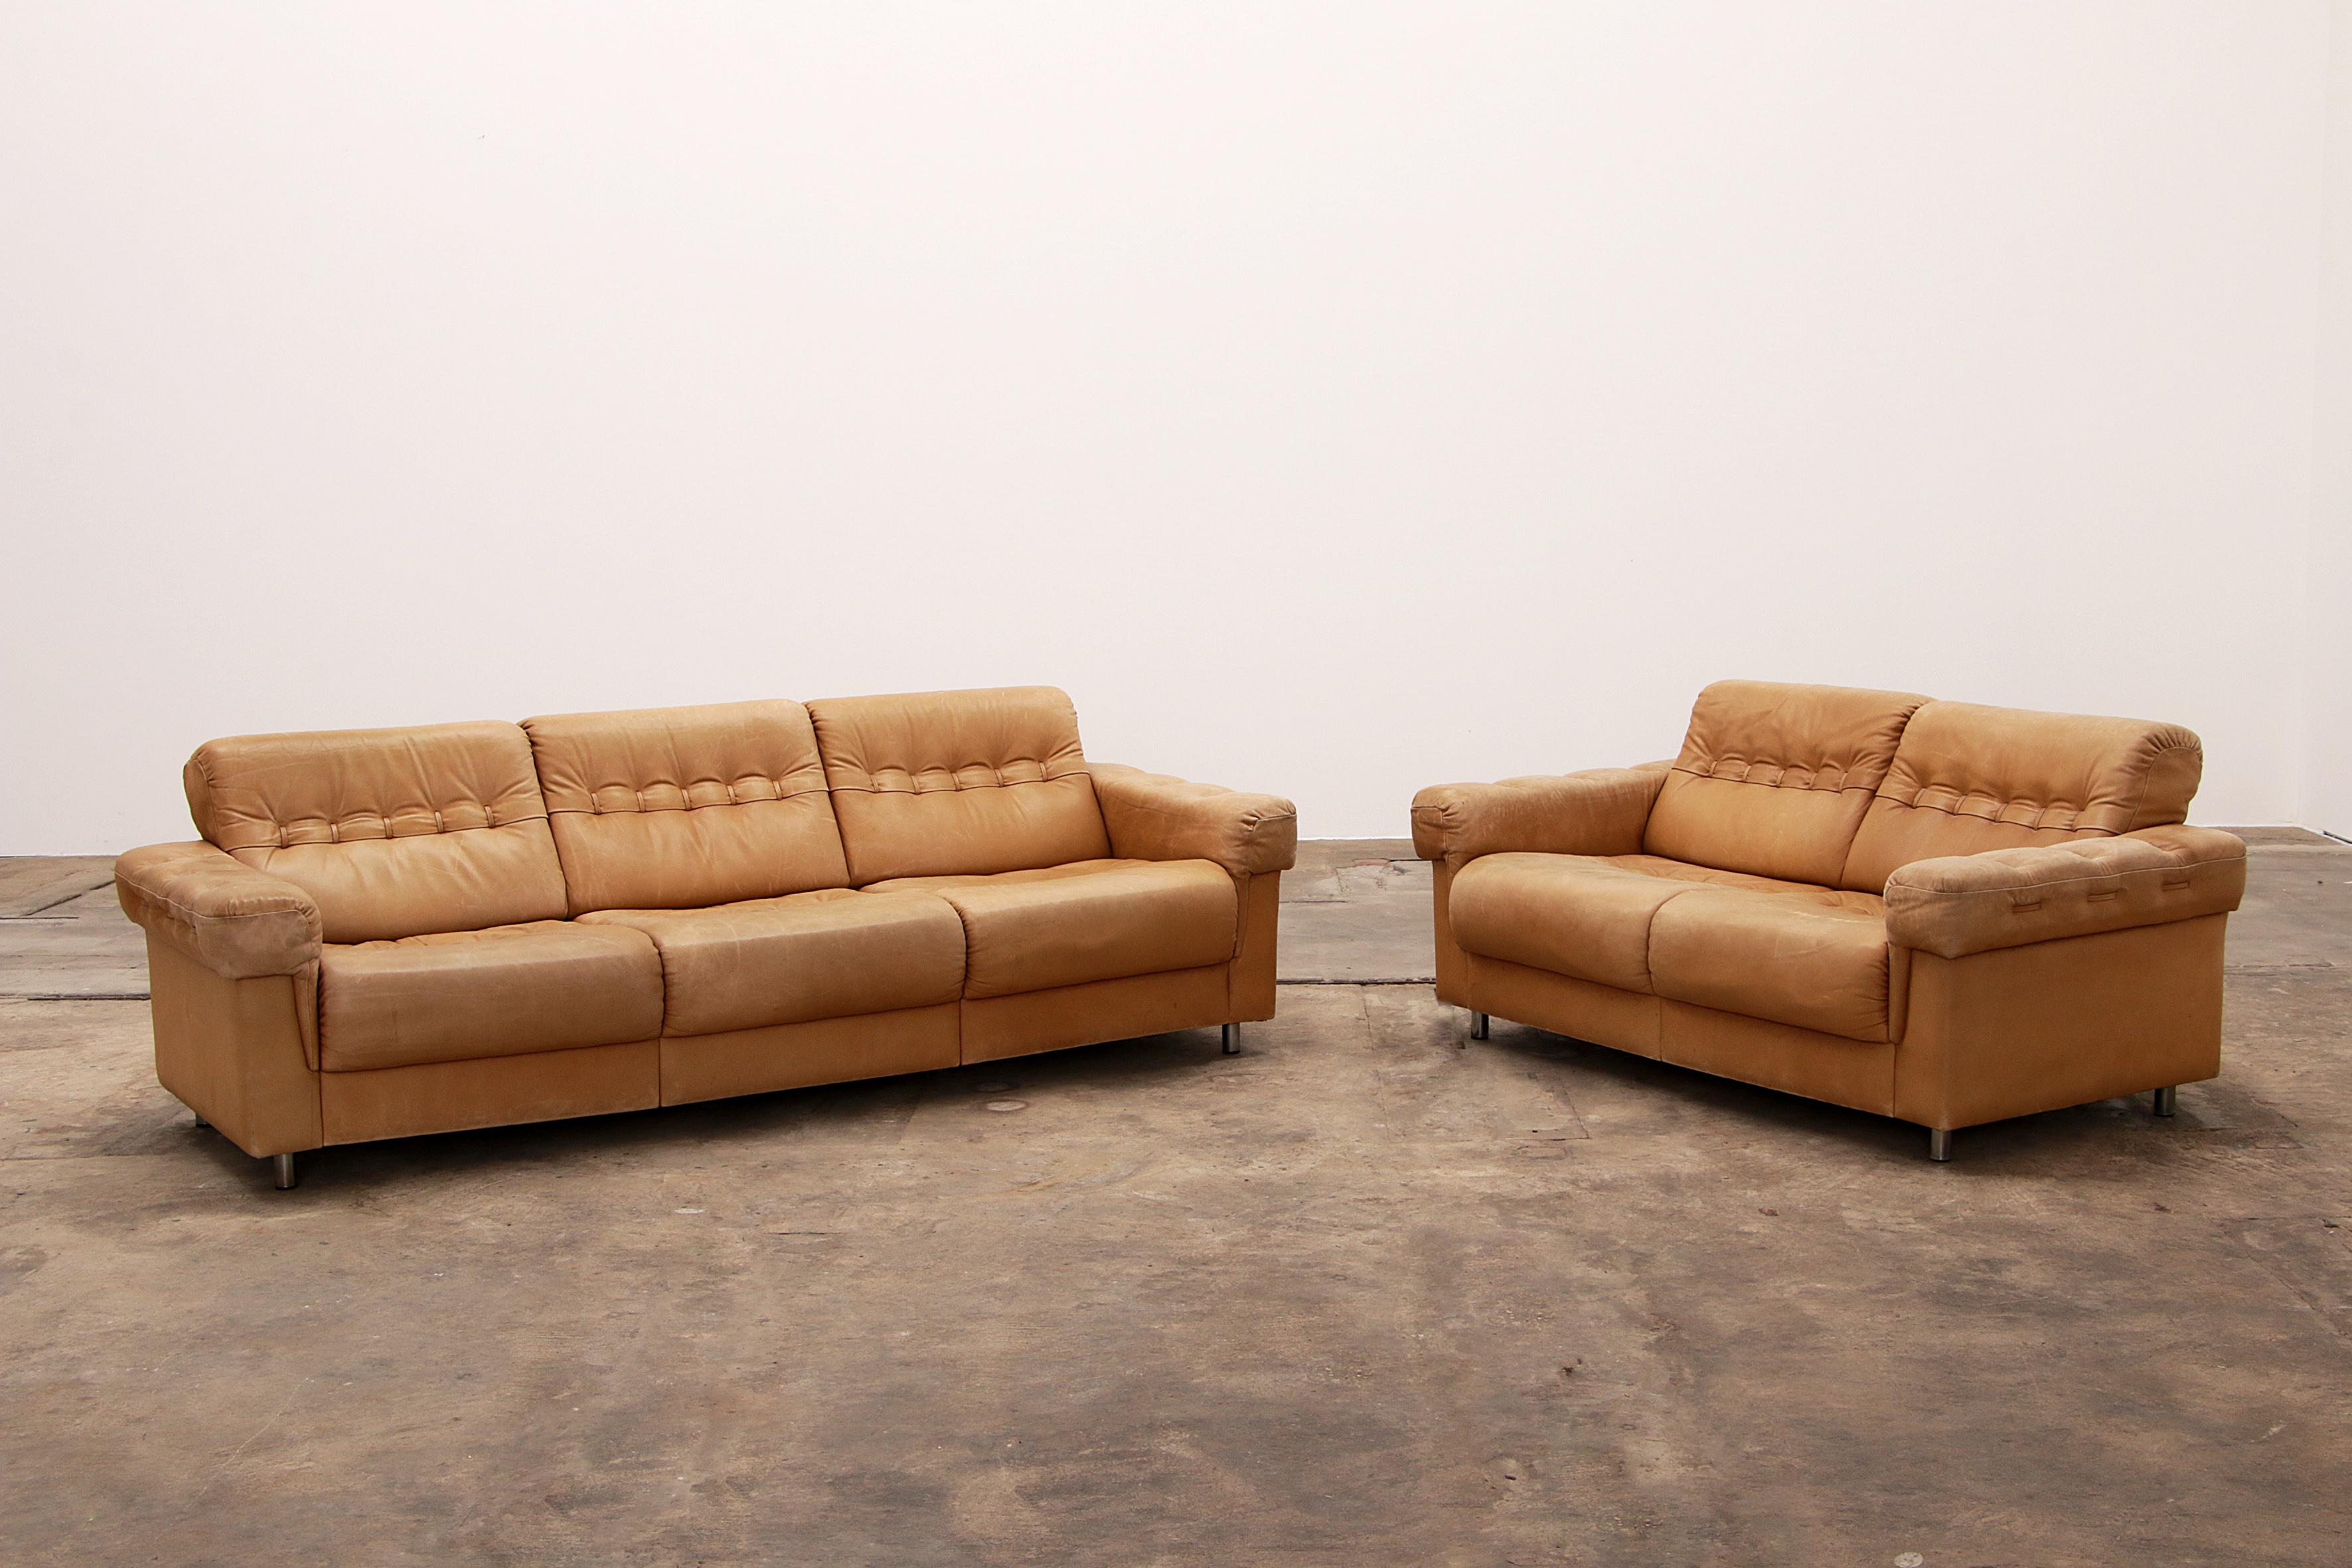 German Vintage Cream Three-Seater with Two-Seater Leather from the 1970s